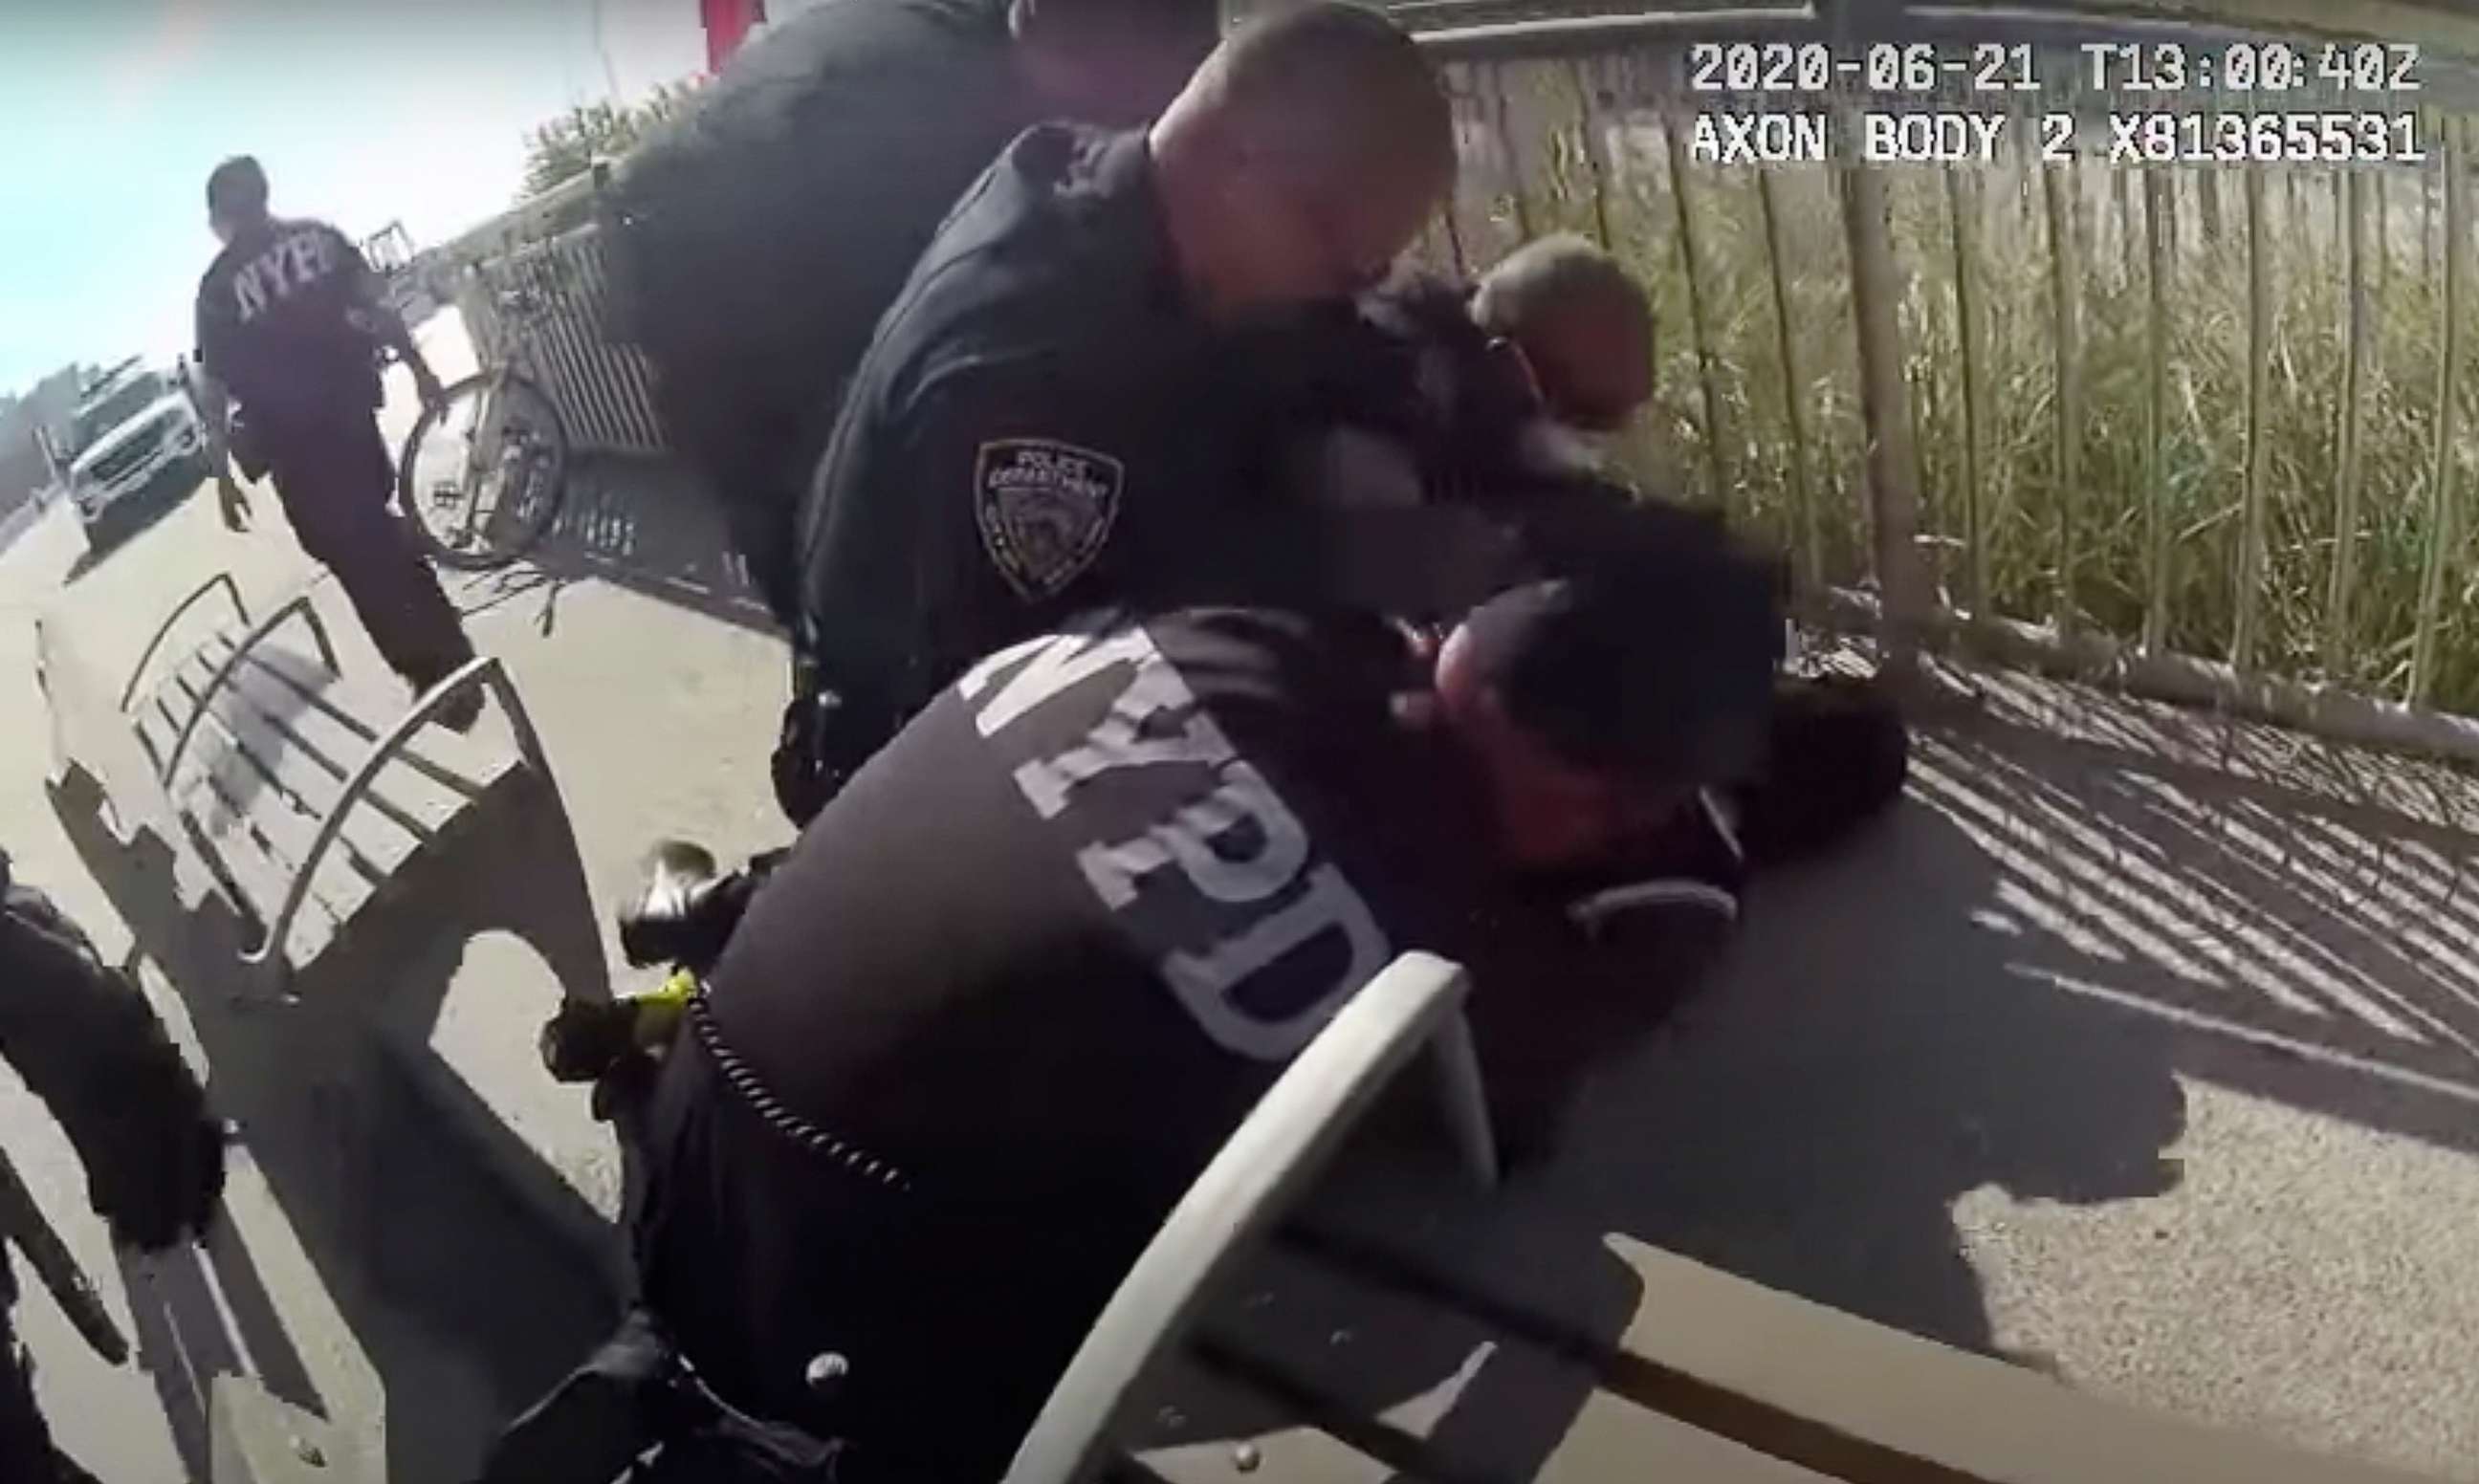 PHOTO: In this photo taken from video, New York Police officers arrest a man on a boardwalk, June 21, 2020, in New York.